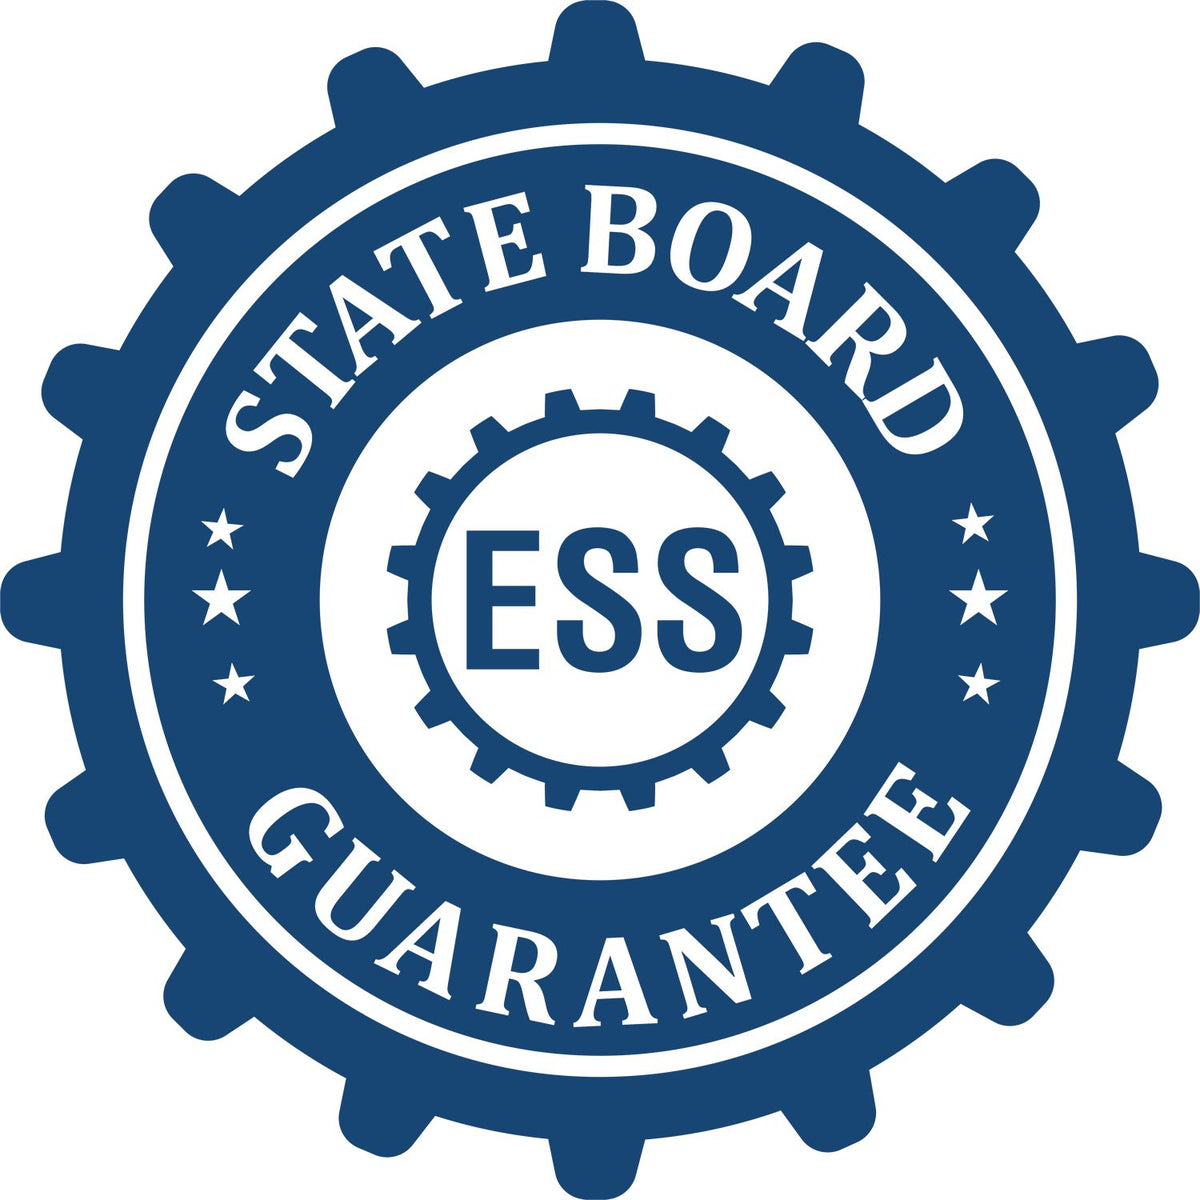 An emblem in a gear shape illustrating a state board guarantee for the Hybrid Rhode Island Landscape Architect Seal